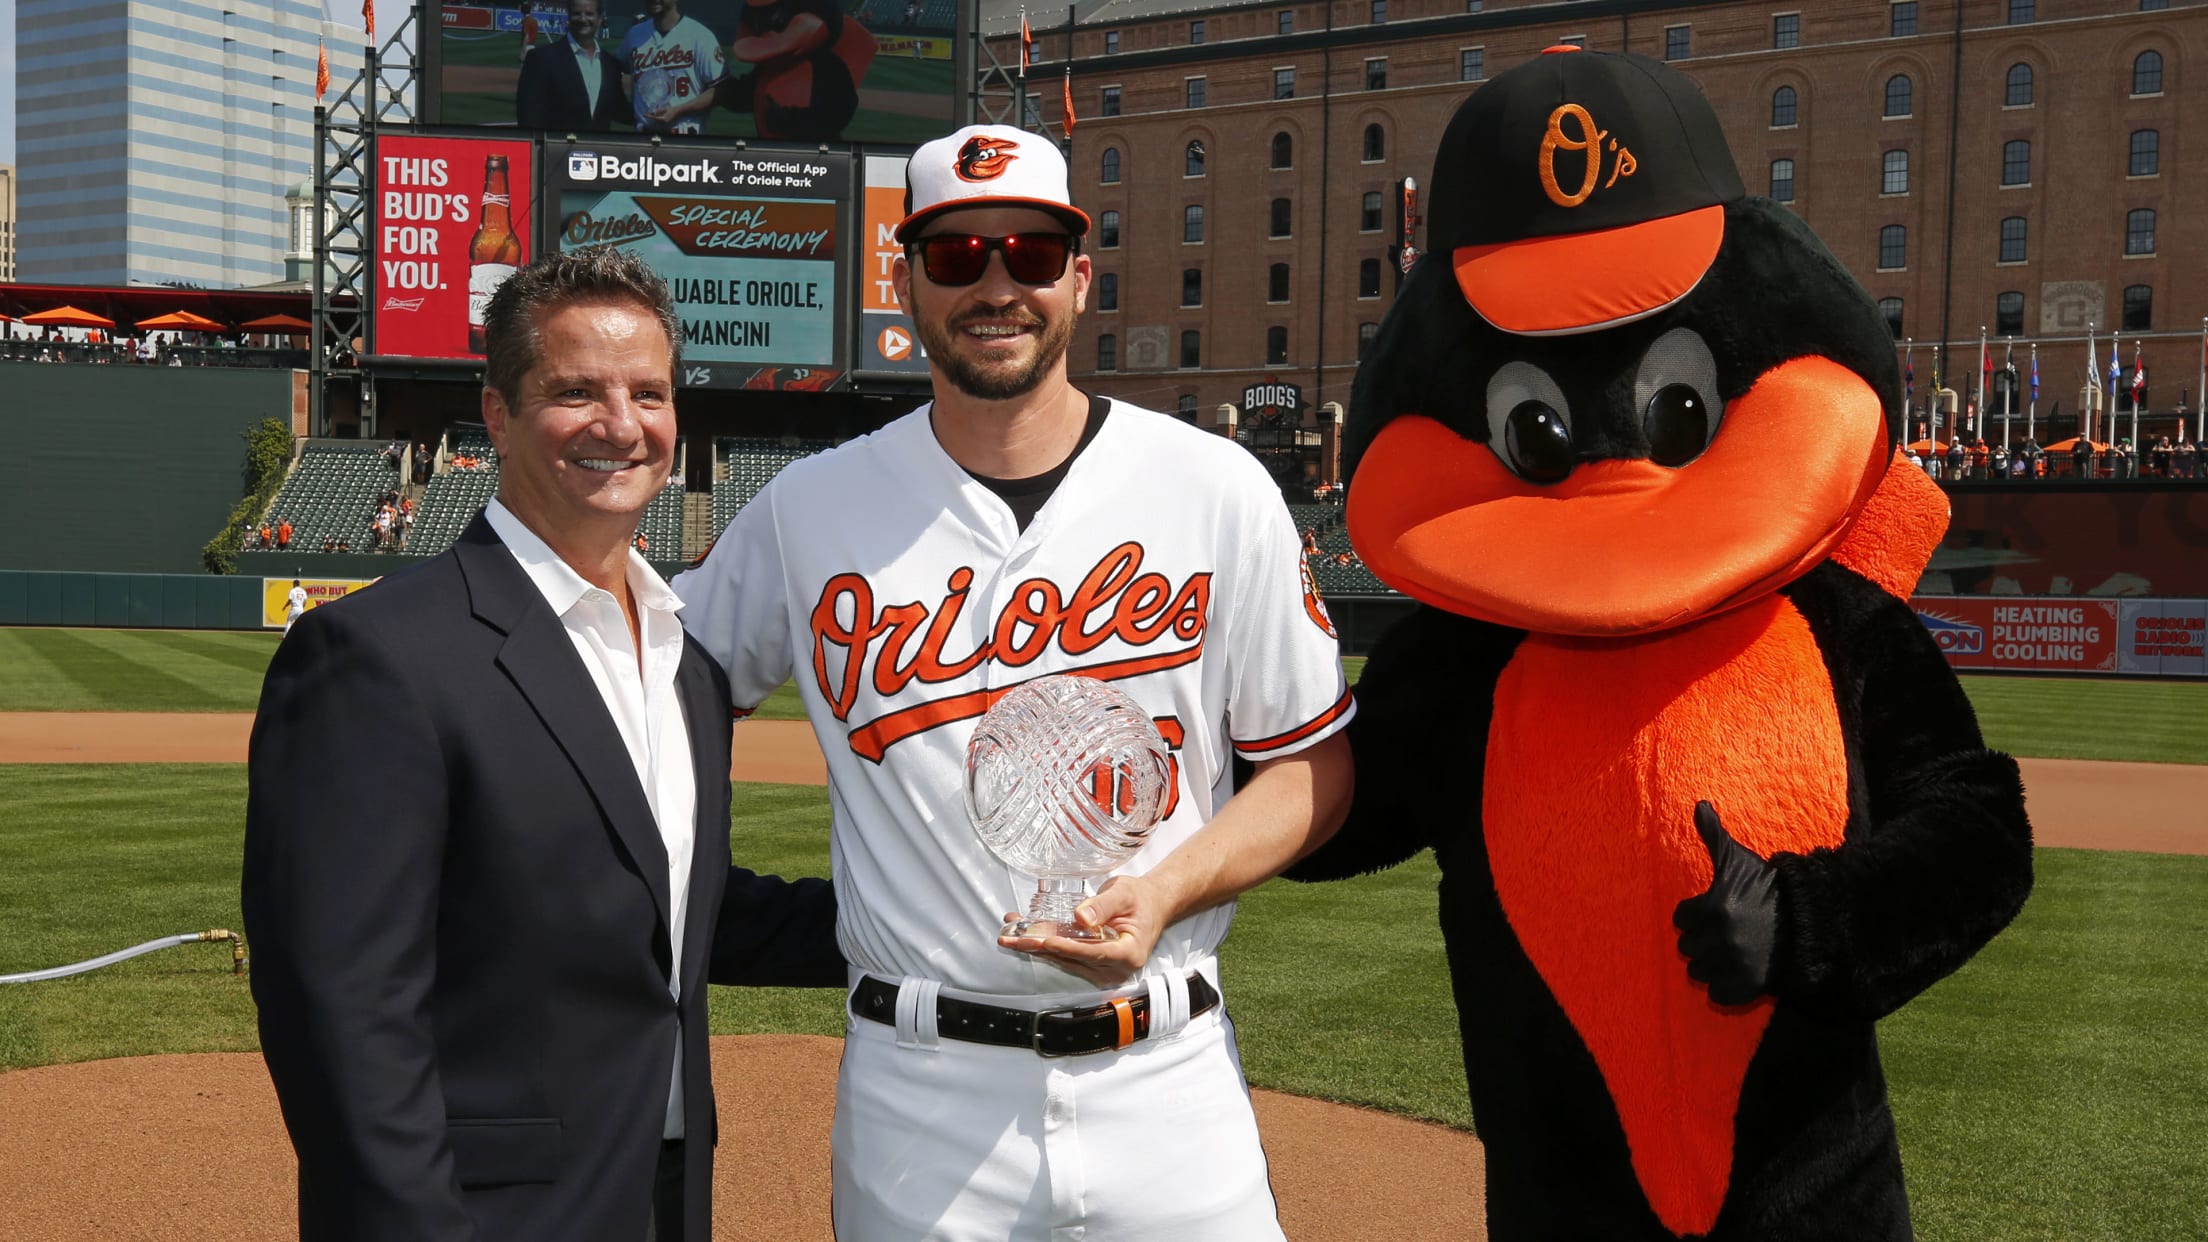 MLB on X: Start off your week with the @Orioles new City Connects